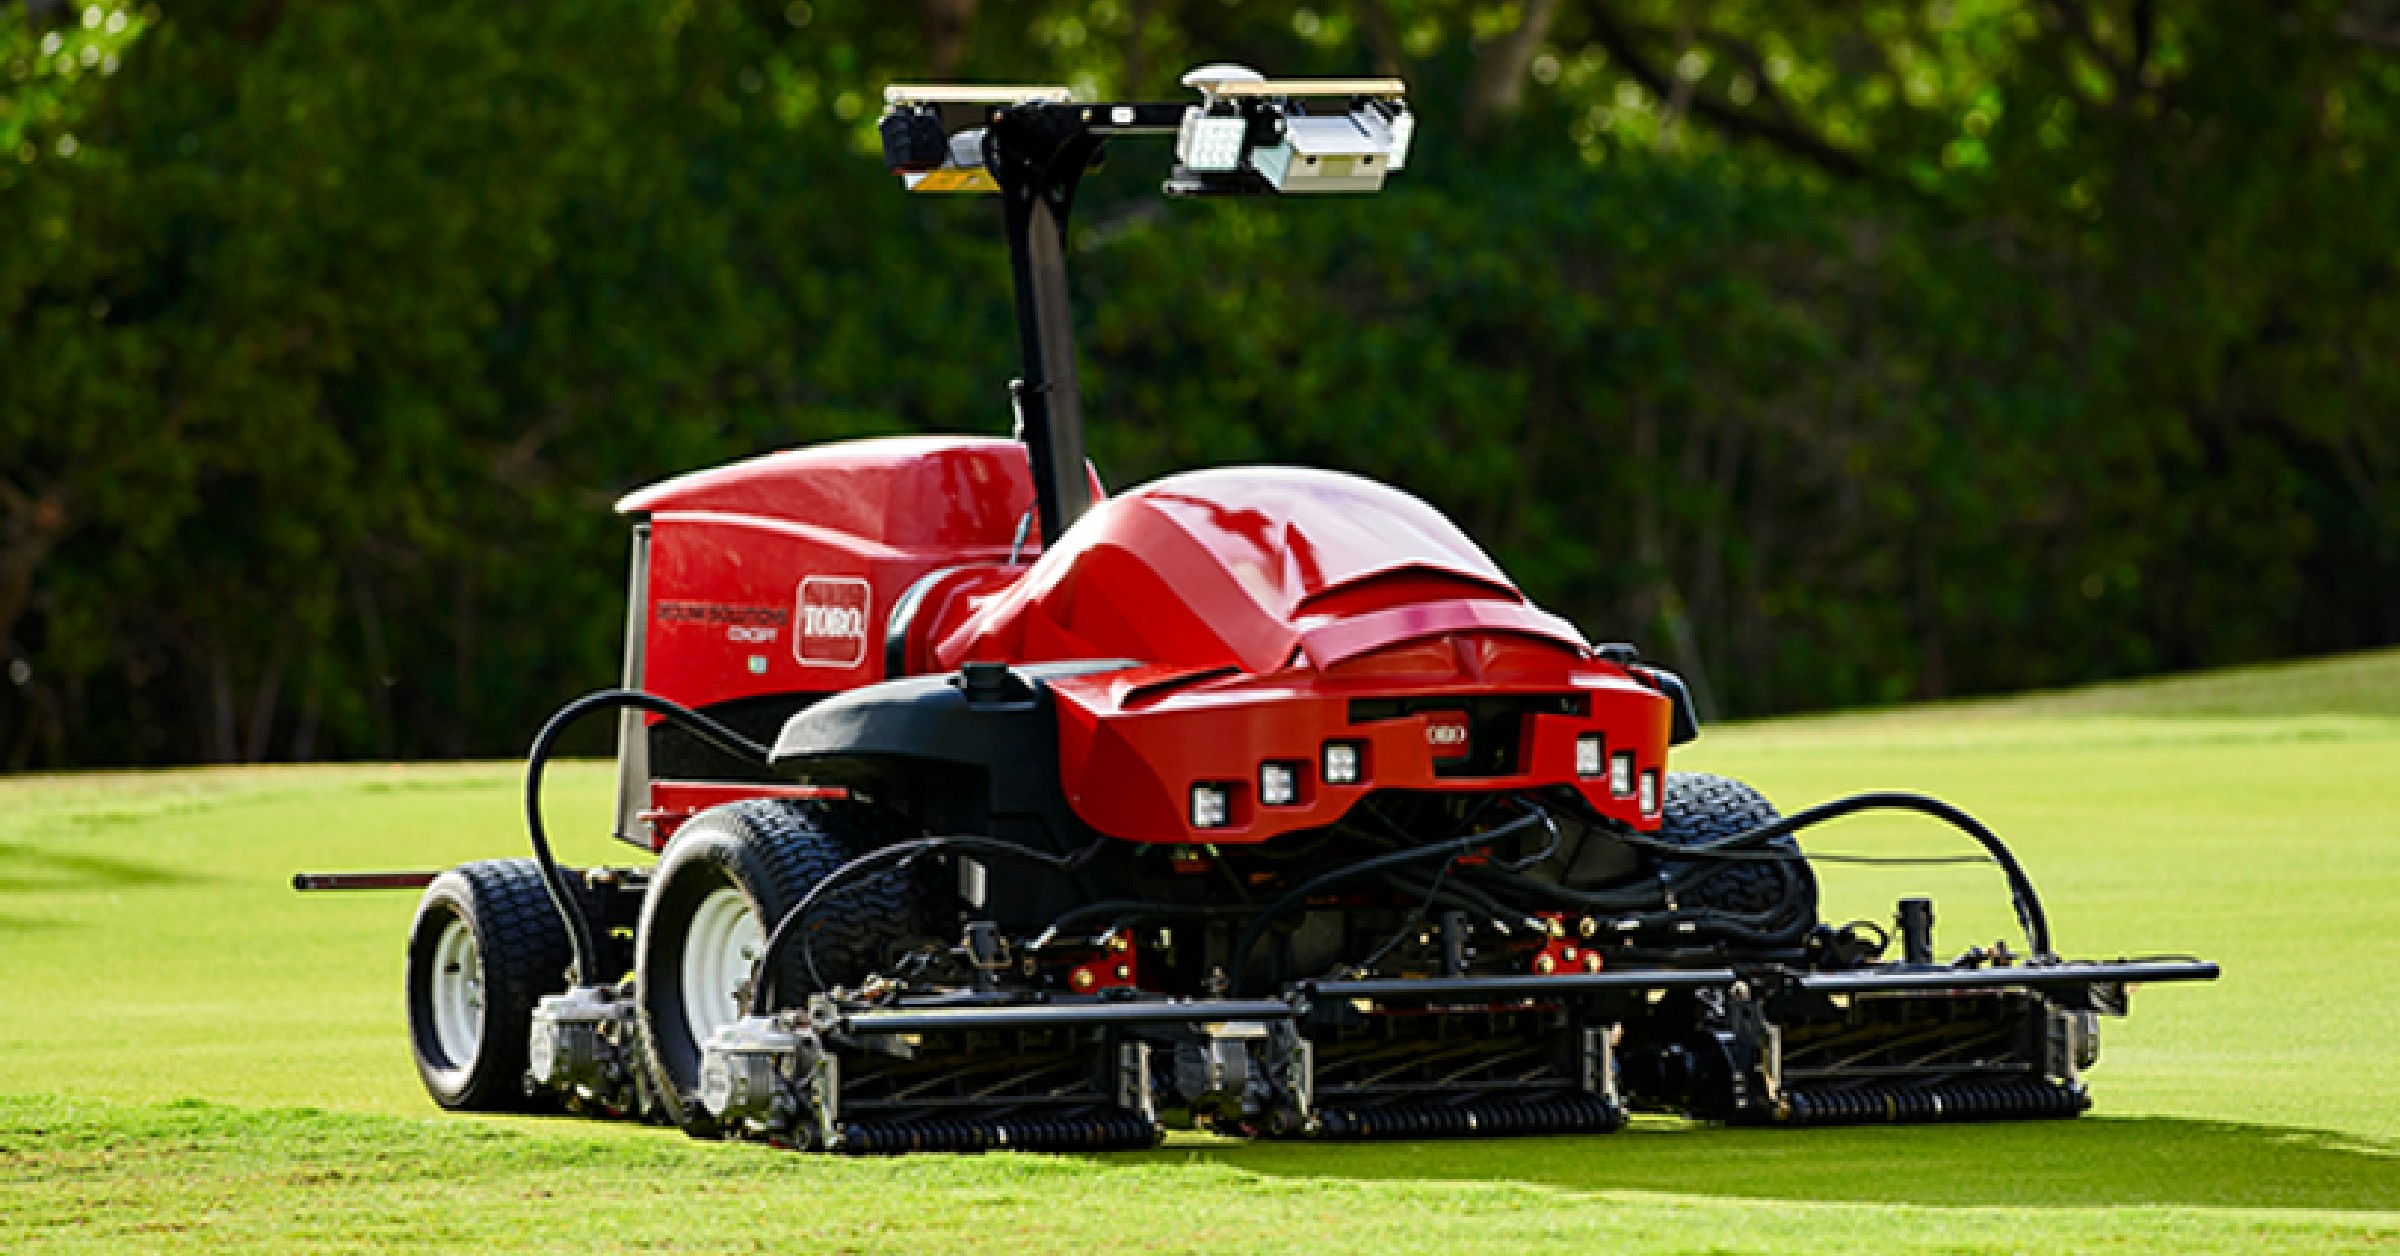 Lawn mower red color